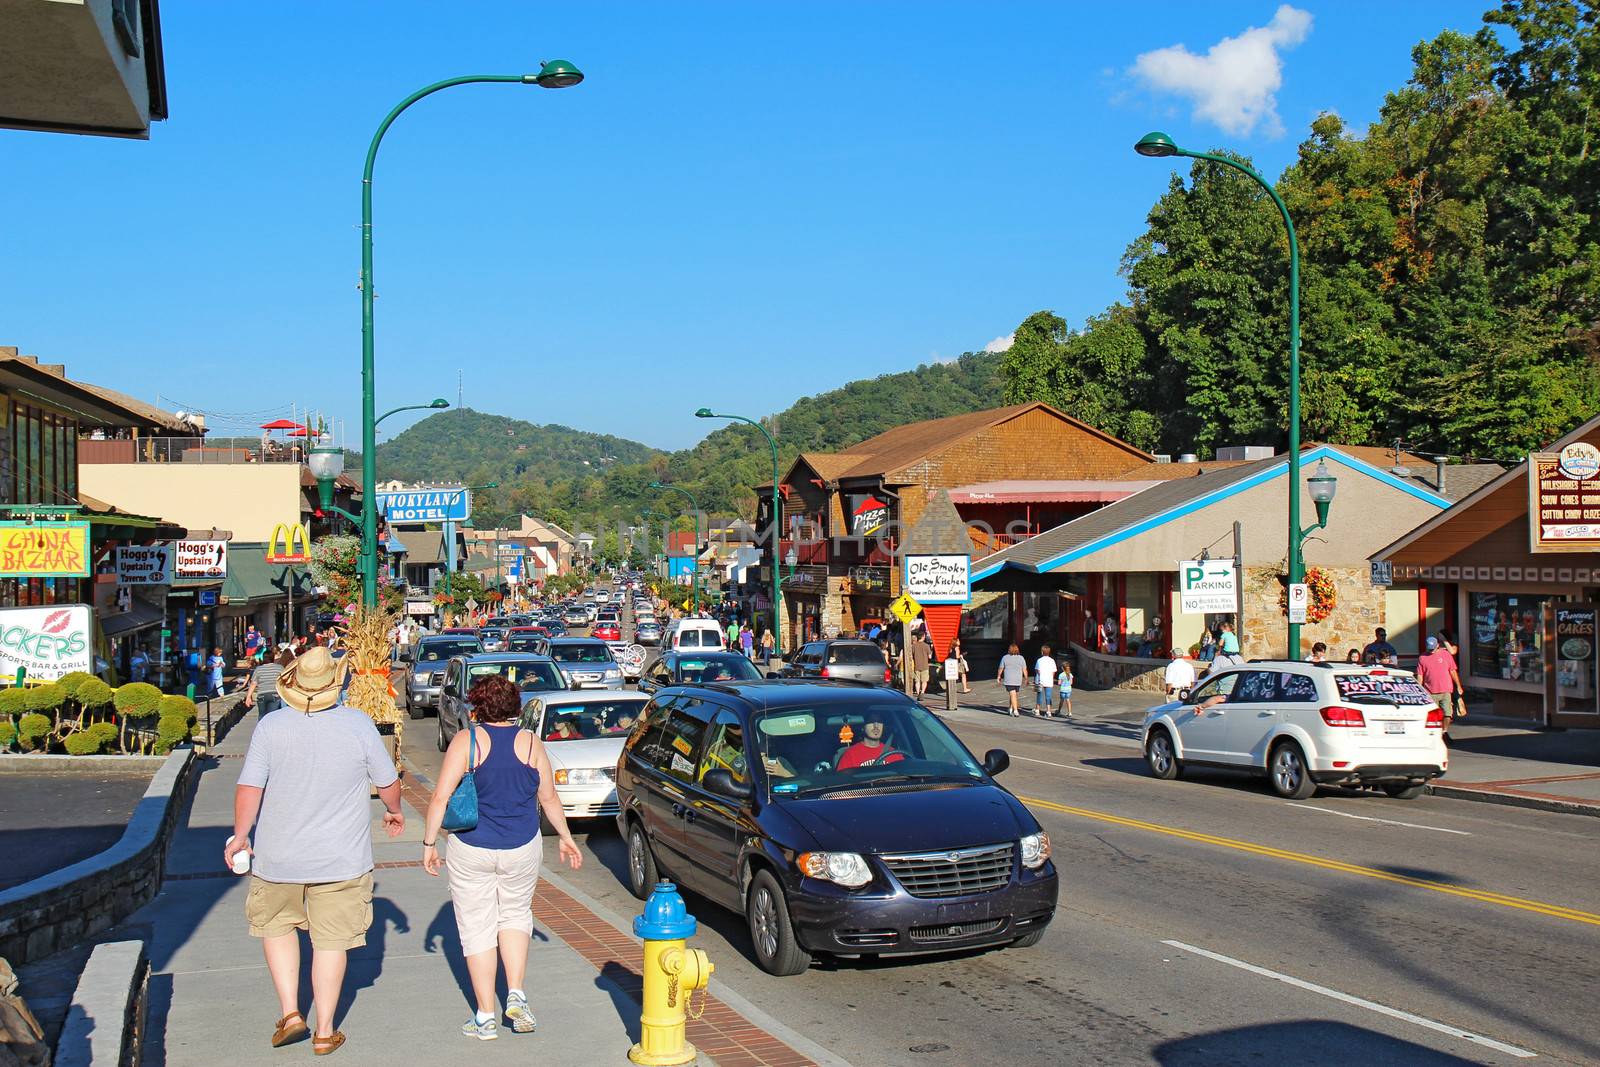 GATLINBURG, TENNESSEE - OCTOBER 5: Tourists and traffic in Gatlinburg, Tennessee on October 5, 2013. Gatlinburg is a major tourist destination and gateway to the Great Smoky Mountains National Park.